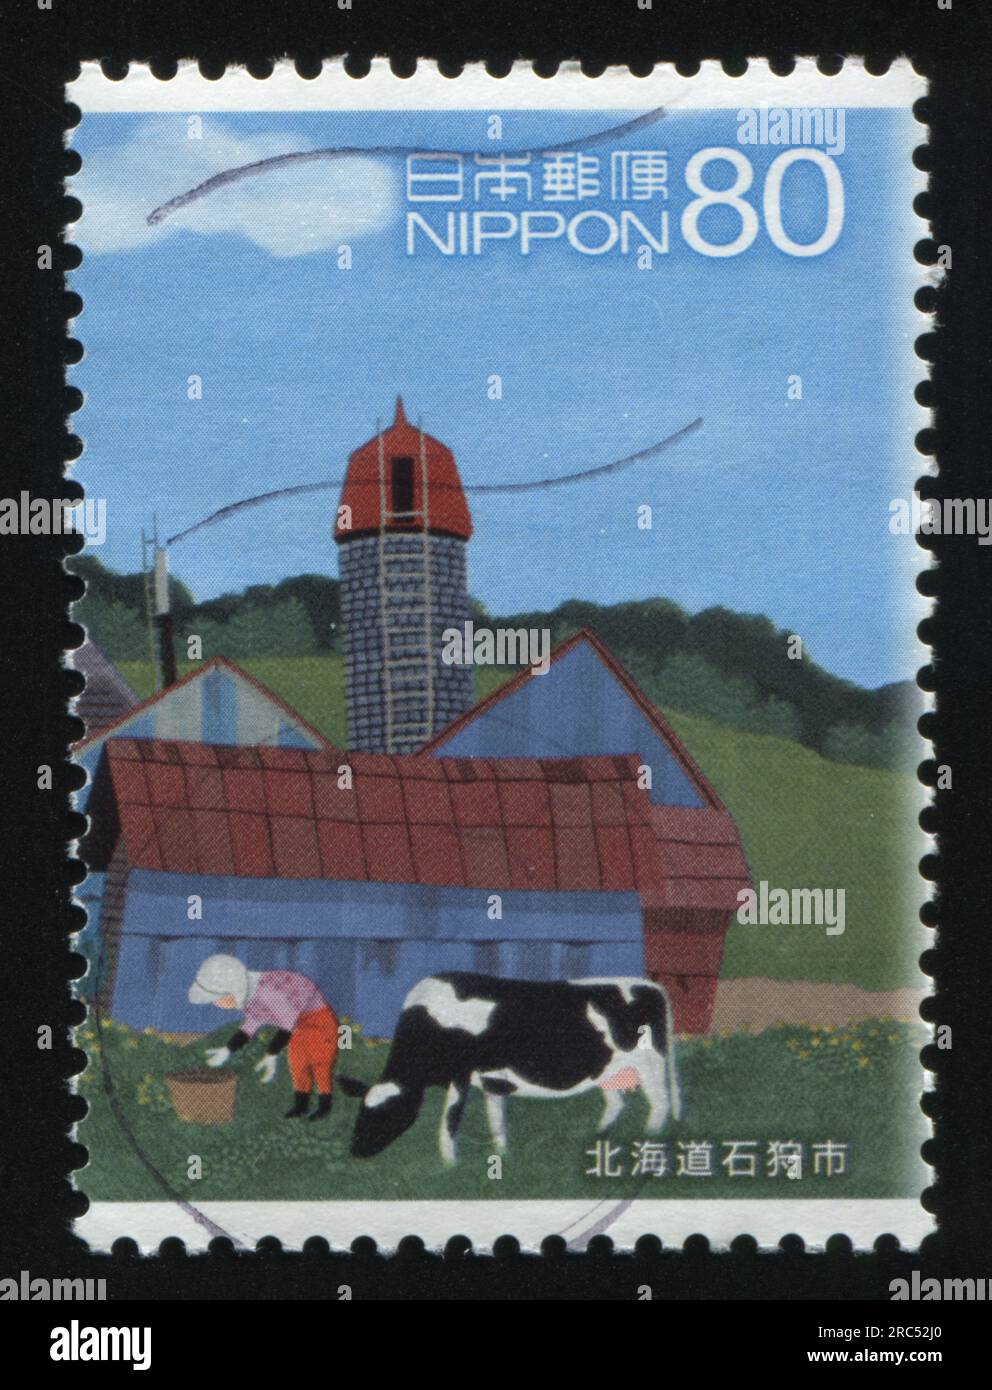 RUSSIA KALININGRAD, 22 APRIL 2016: stamp printed by Japan, shows a woman taking care of a caw and a kitchengarden near the country house, circa 2013 Stock Photo